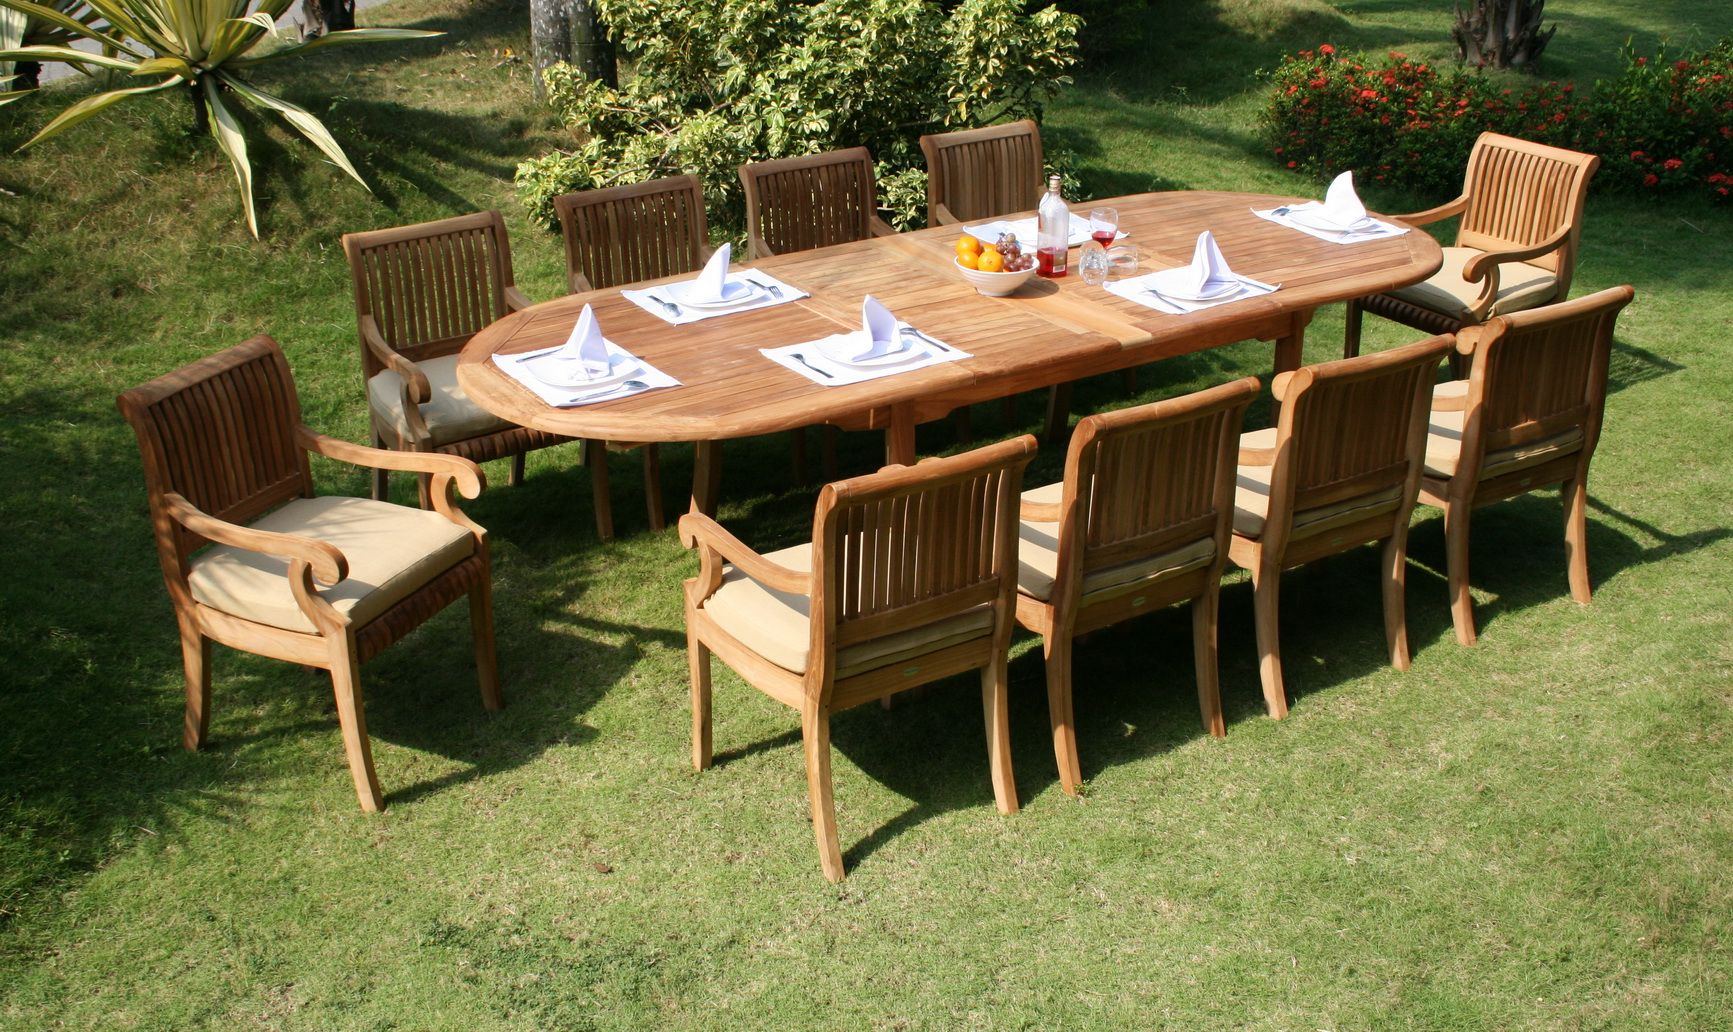 Teak Dining Set:10 Seater 11 Pc – 117" Double Extension Oval Table 10 Pertaining To Teak Wood Outdoor Table And Chairs Sets (View 10 of 15)